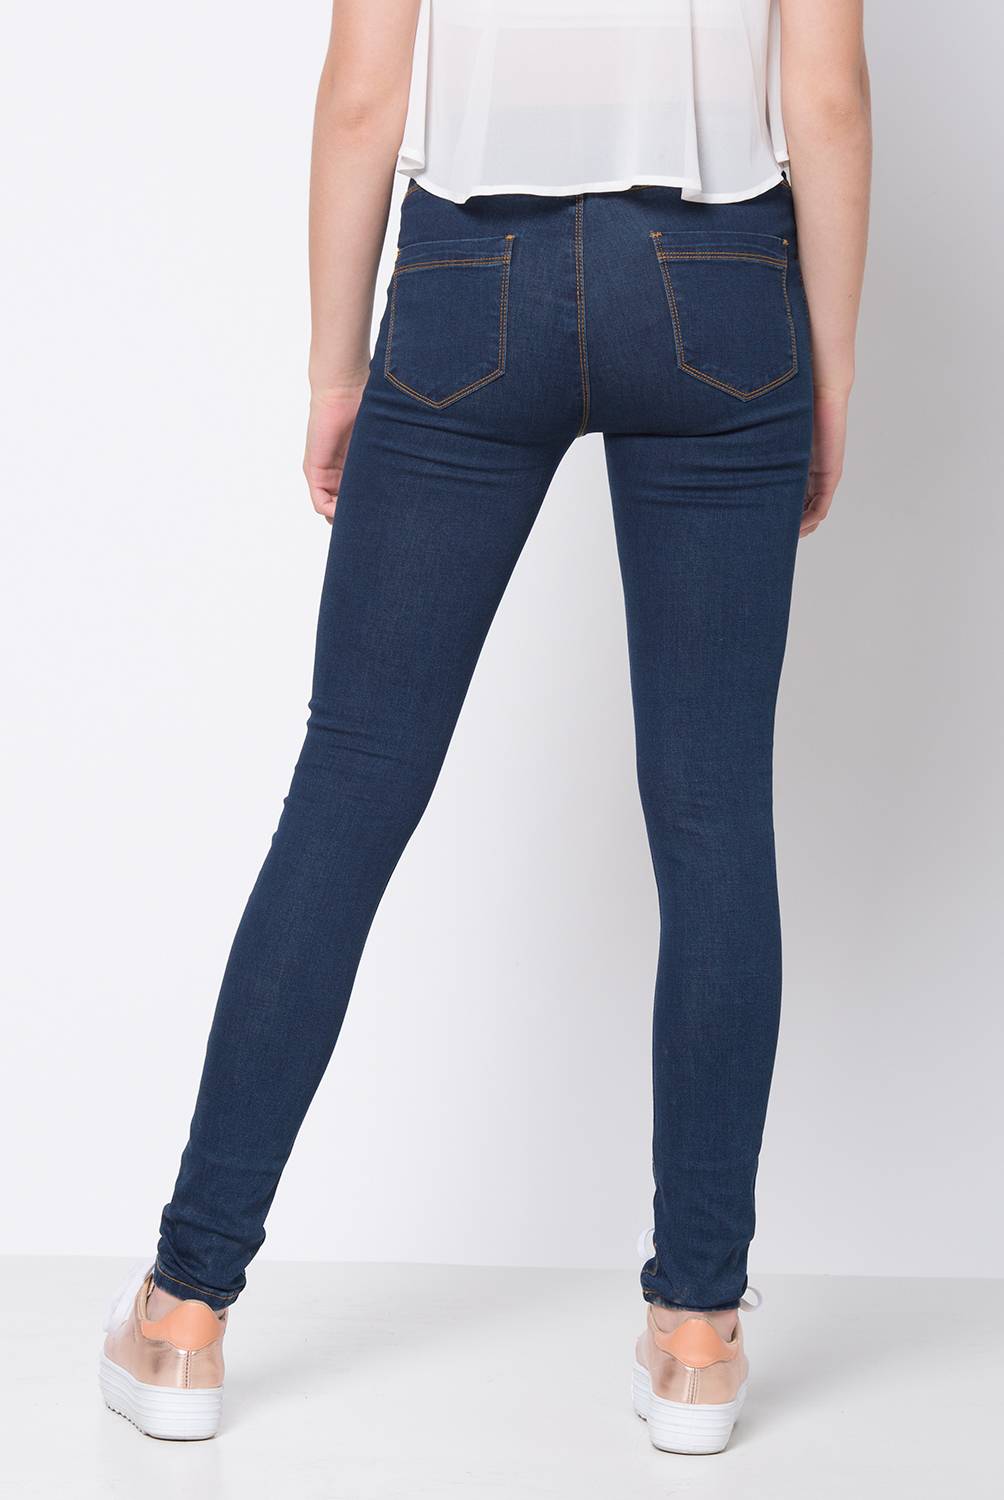 SYBILLA - Jeans Basico Bscjds101C